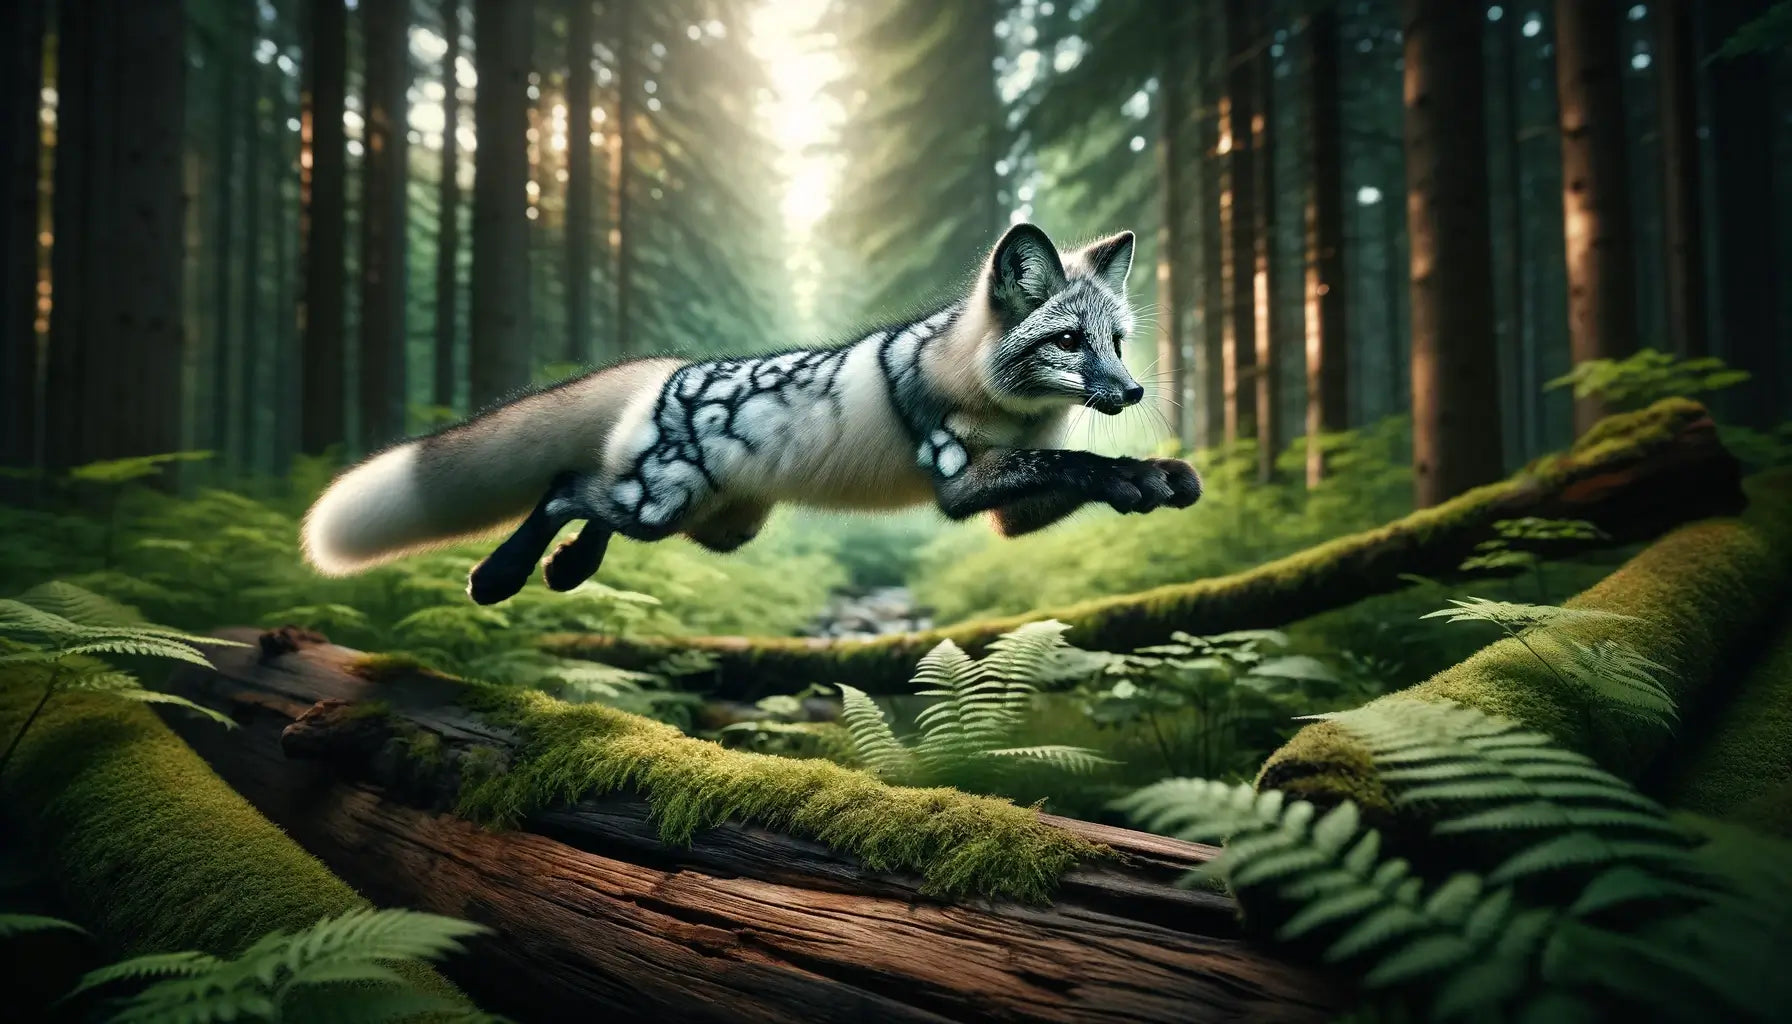 A Canadian marble fox leaping over a log in a lush green forest, showcasing its agility and strength.